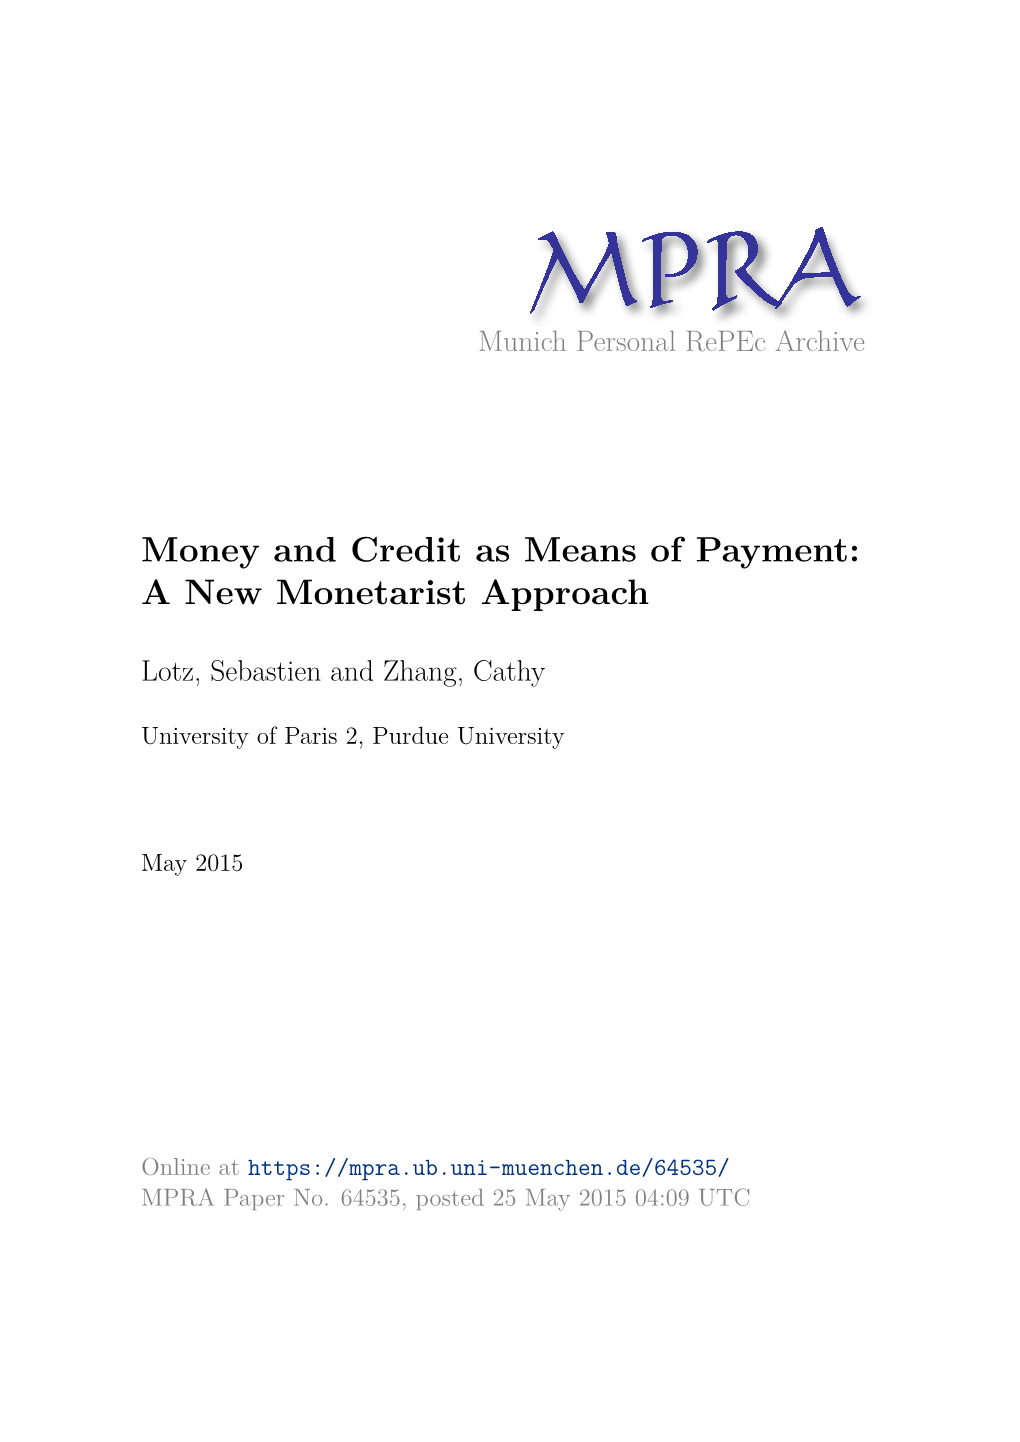 Money and Credit As Means of Payment: a New Monetarist Approach